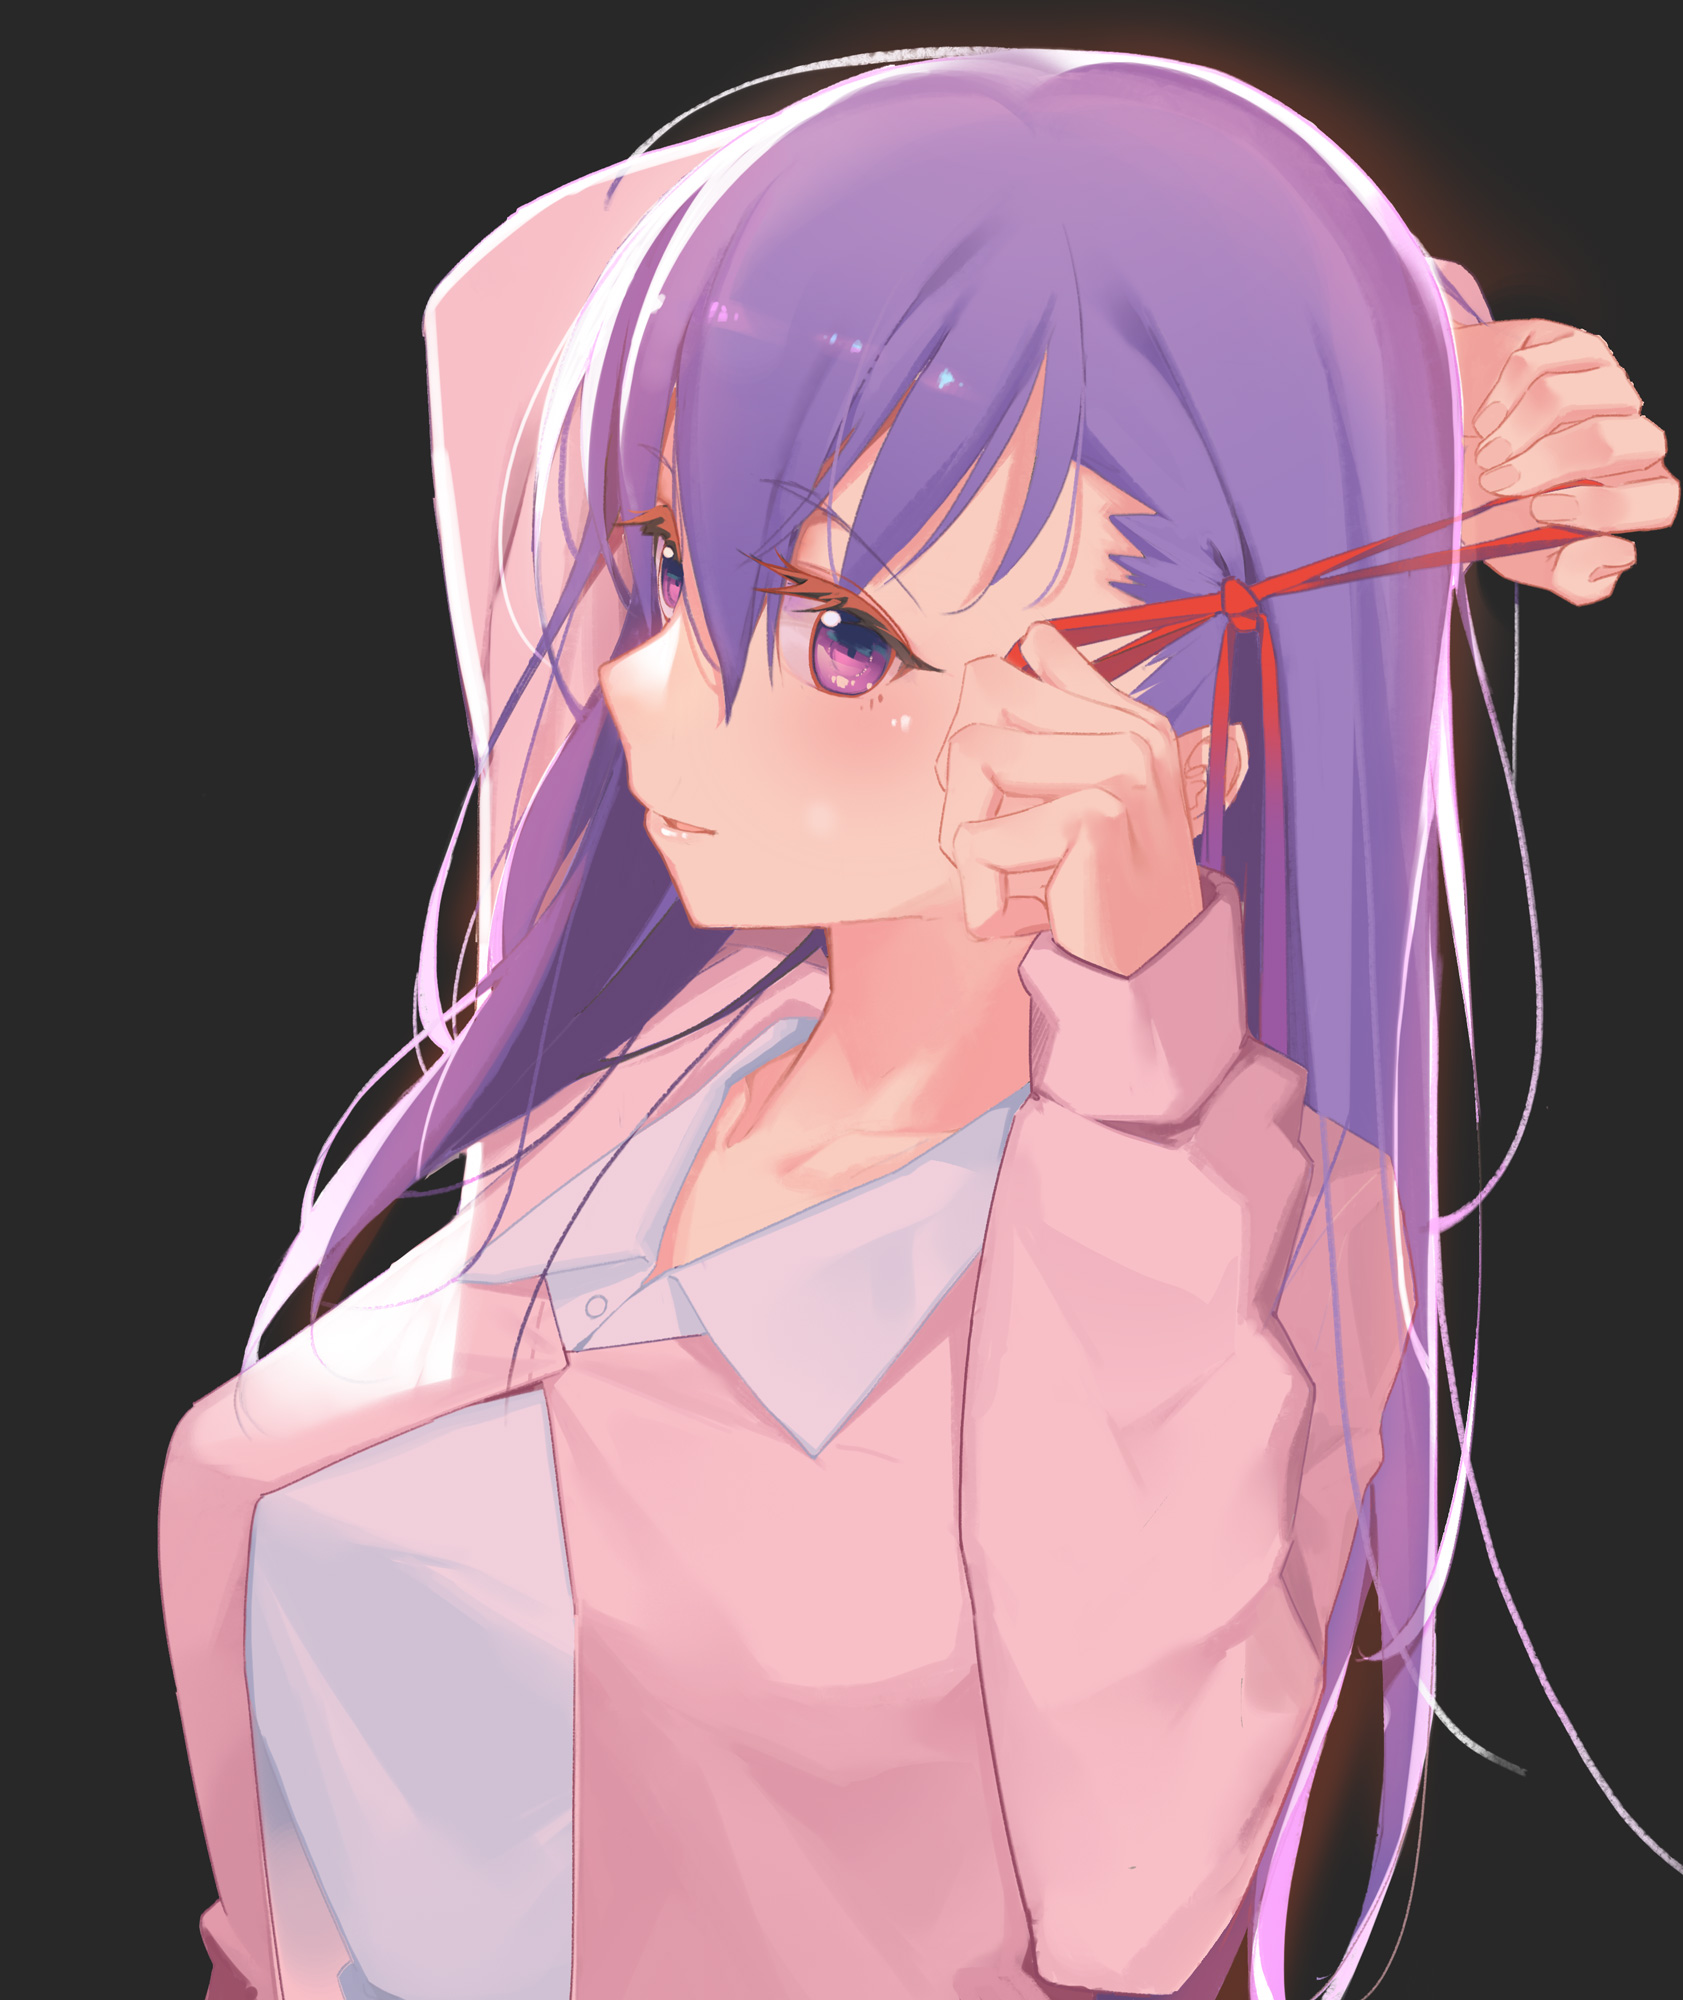 Anime 1683x2000 Fate series Fate/Stay Night fate/stay night: heaven's feel anime girls big boobs red ribbon long hair purple hair blushing touching hair white dress looking at viewer Matou Sakura 2D portrait display smiling purple eyes simple background fan art open mouth anime